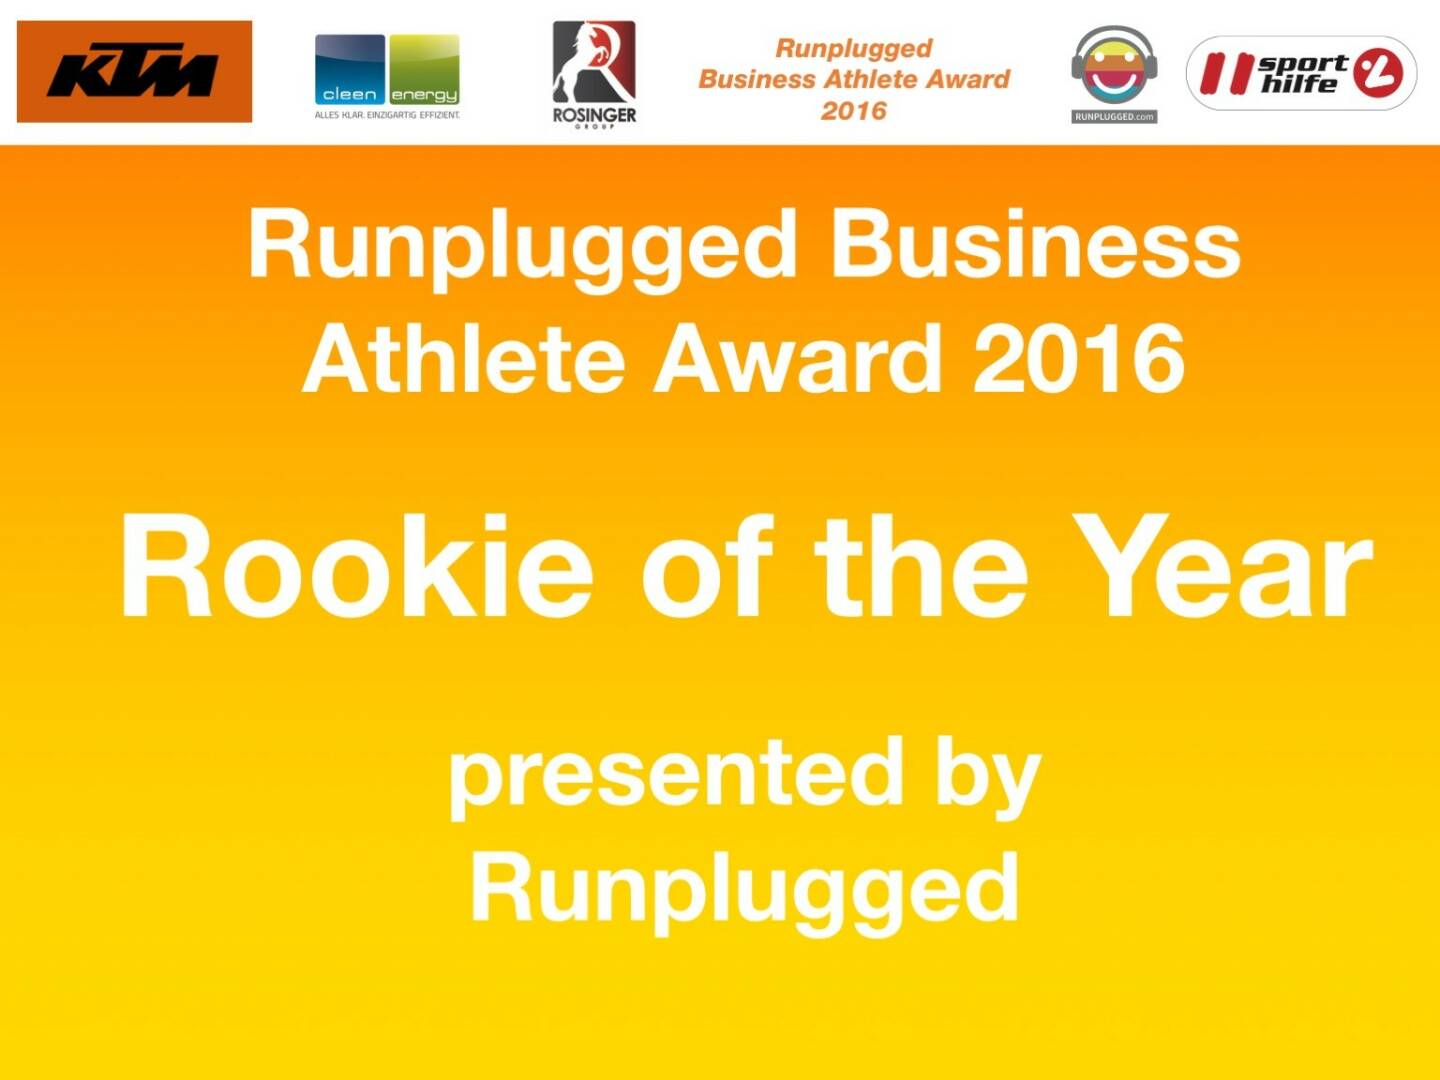 Business Athelete Award 2016 - Rookie of the Year